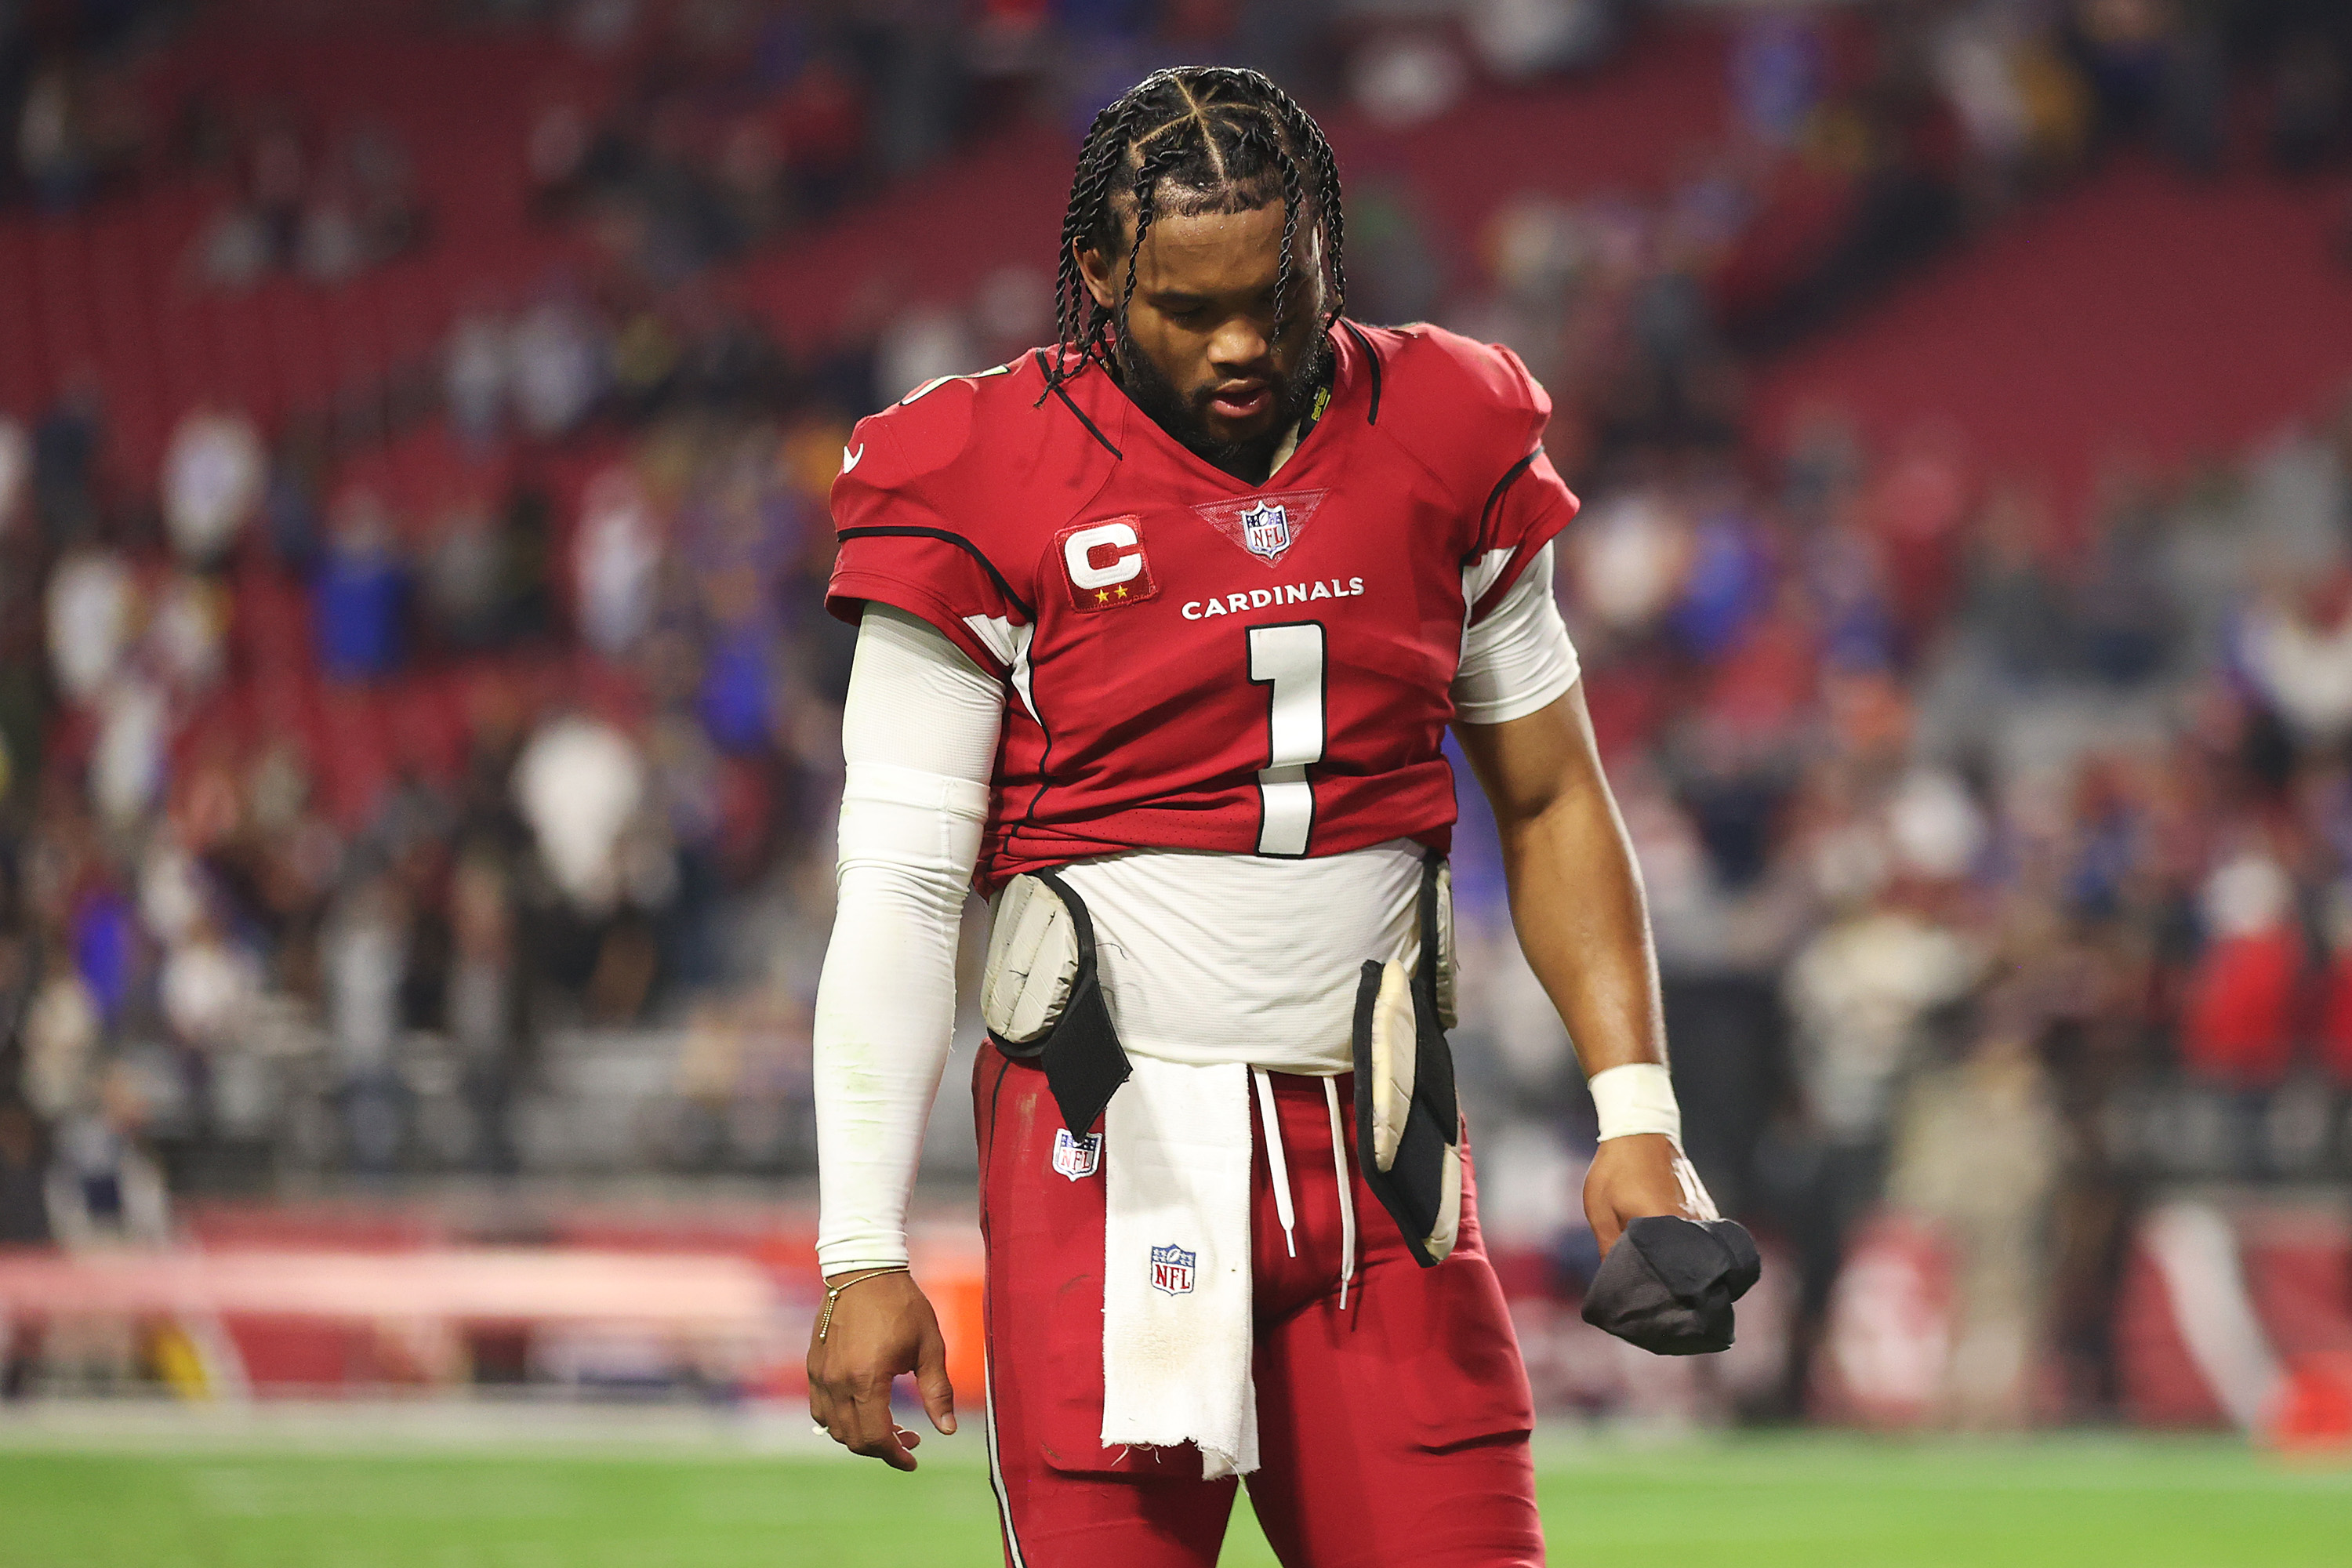 Cardinals QB Kyler Murray walks off the field after loss to the Rams